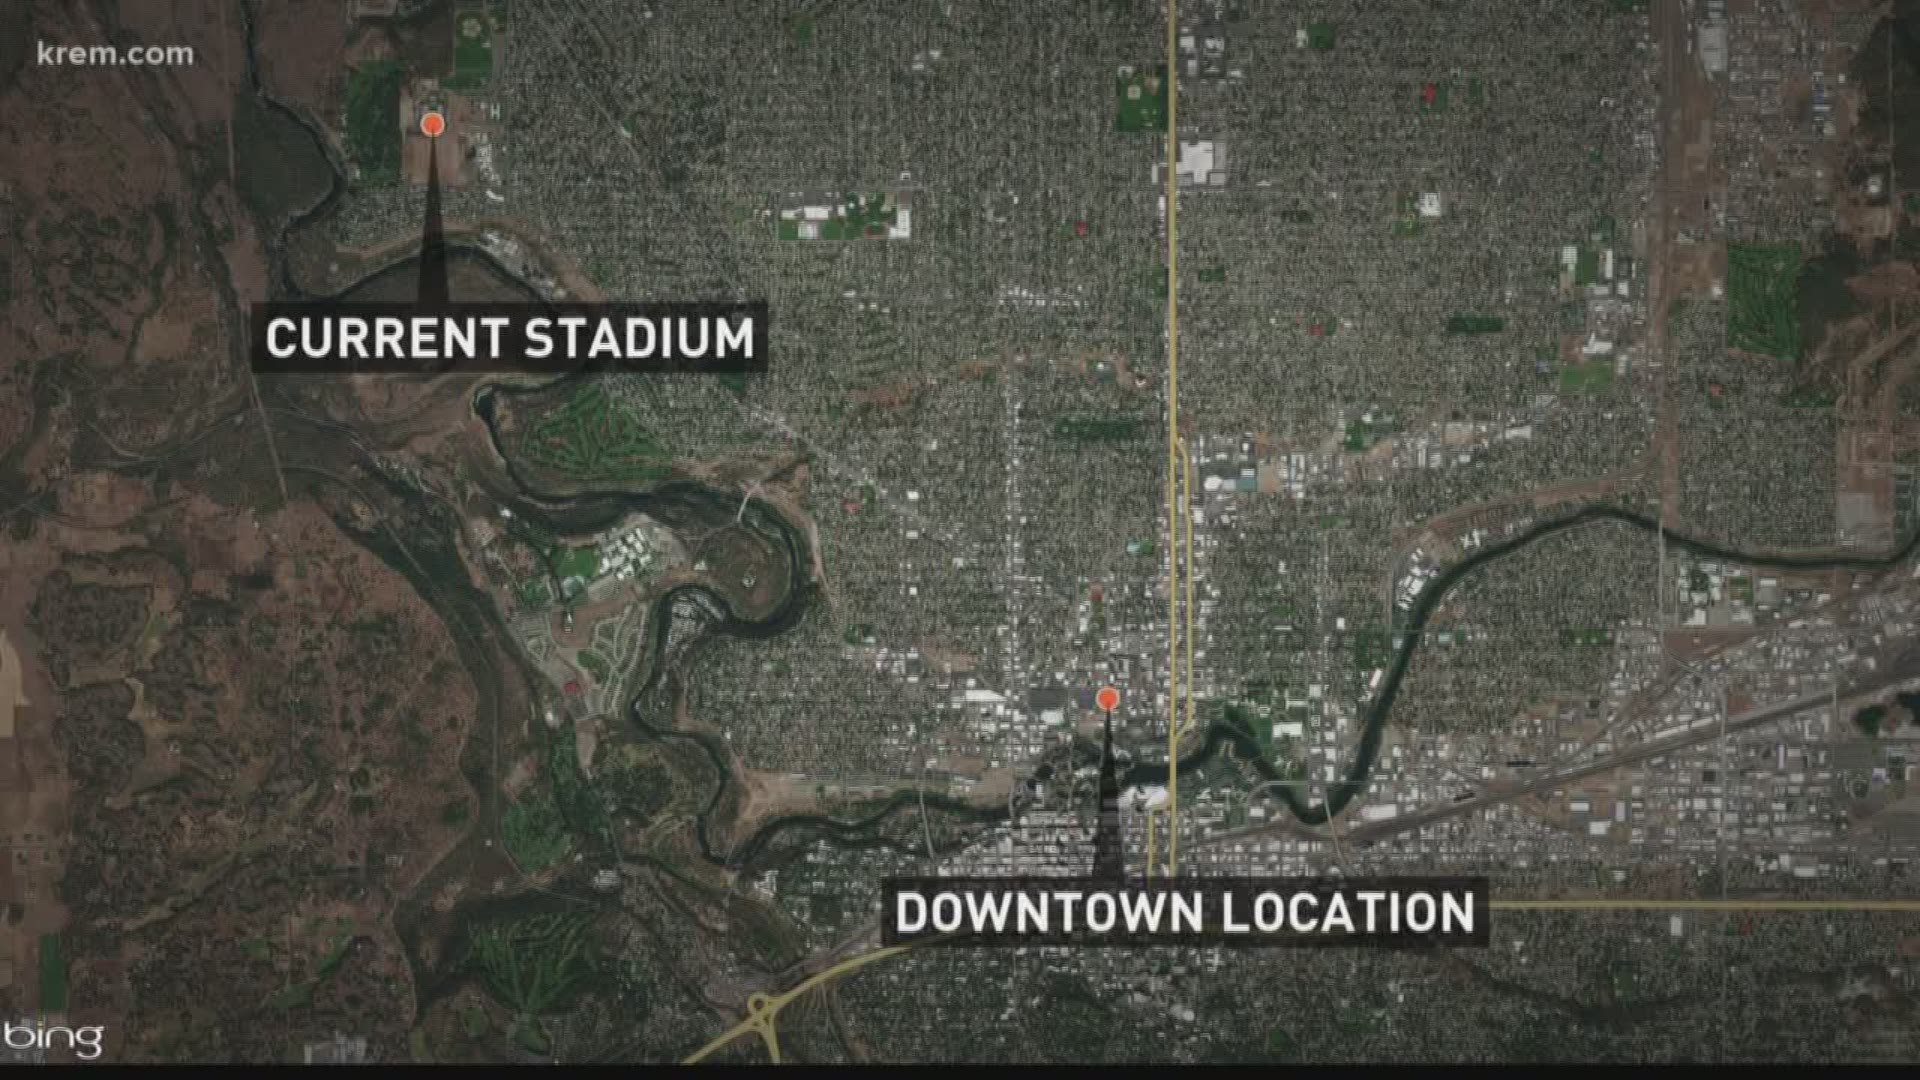 Voters were given the choice between building the new 5,000-seat venue at the same site as the current Joe Albi Stadium or downtown near the Spokane Arena.